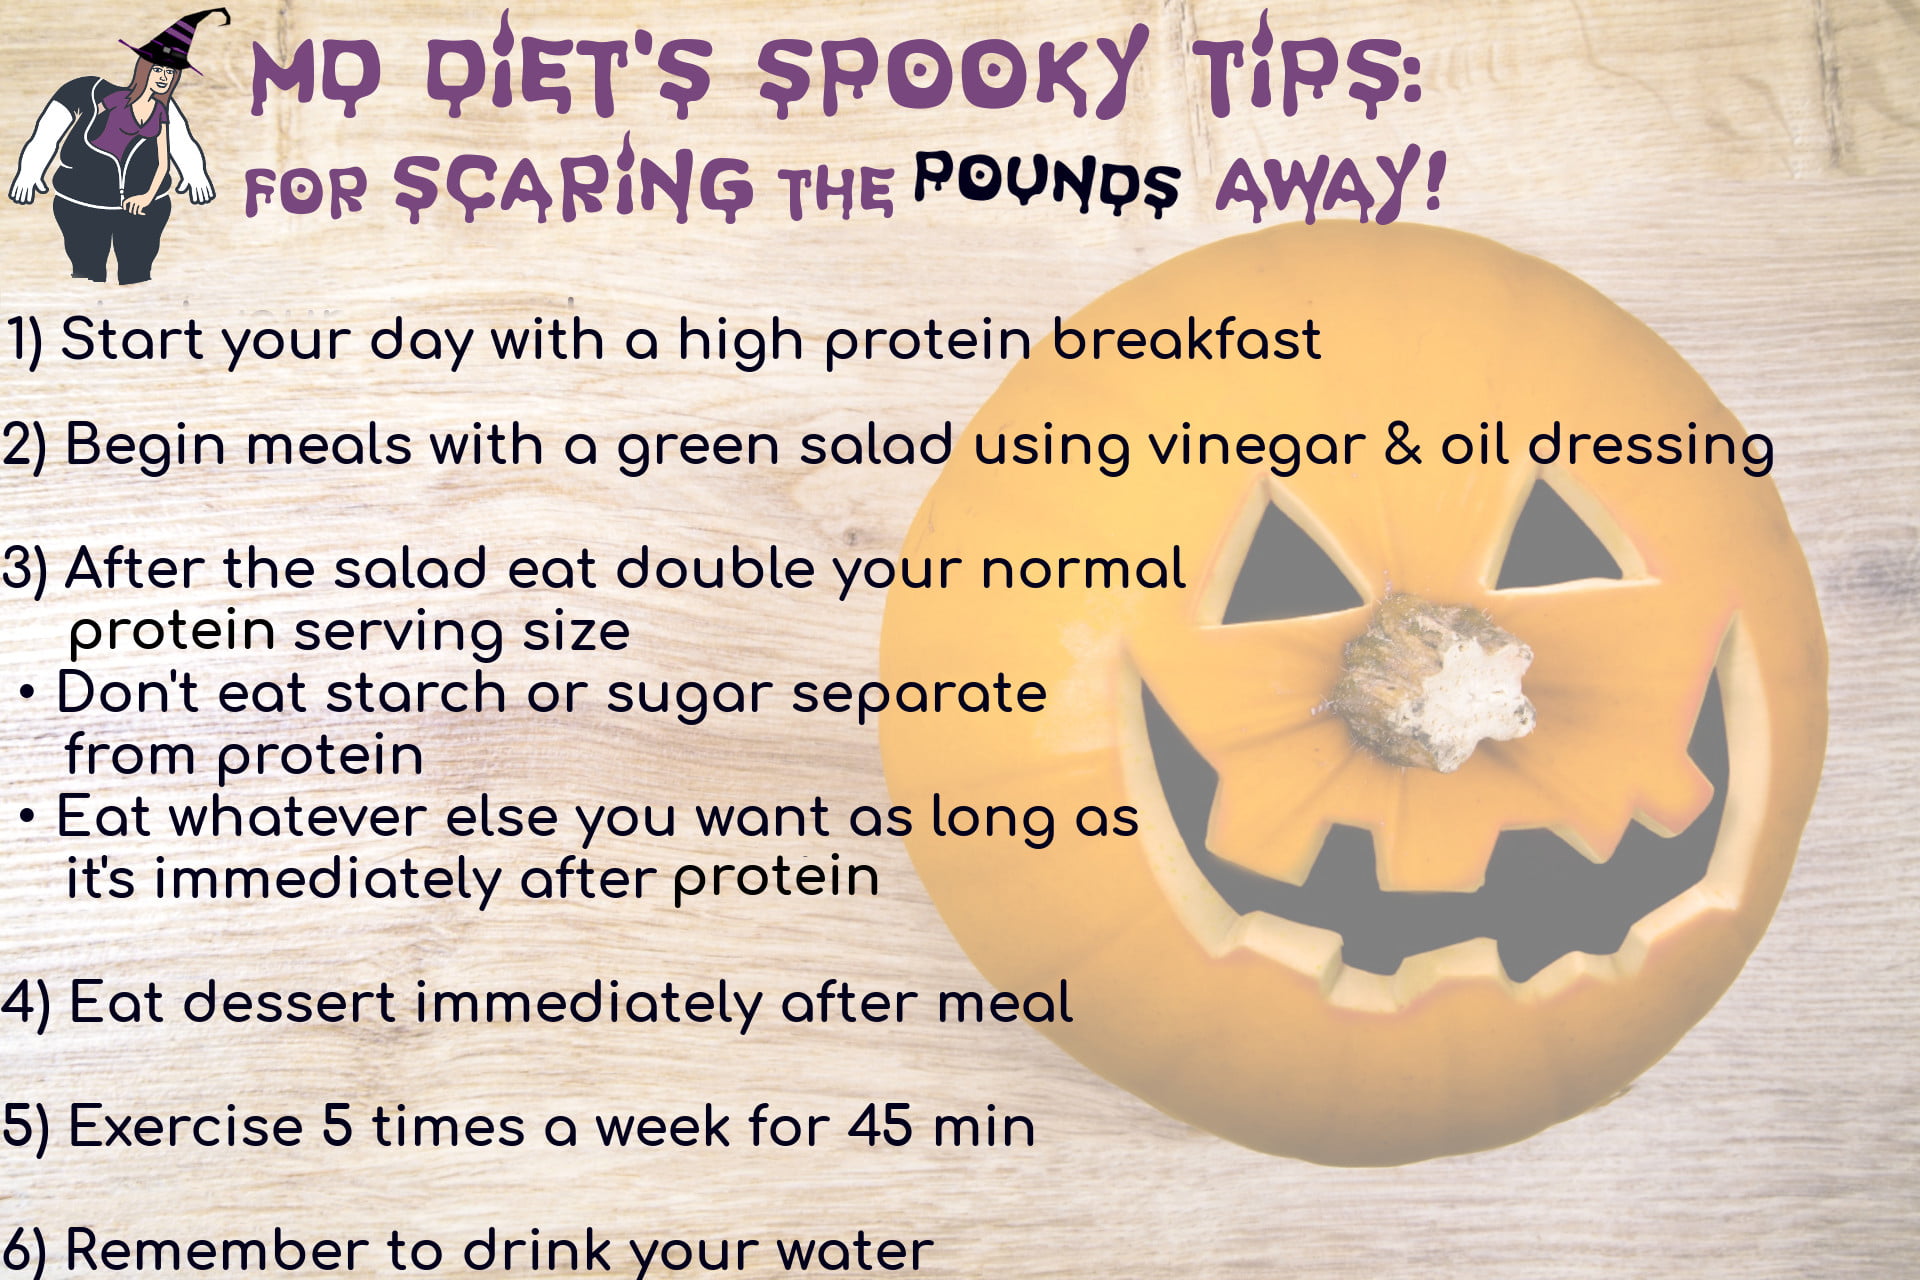 MD Diet's Spooky Tips For Losing Weight